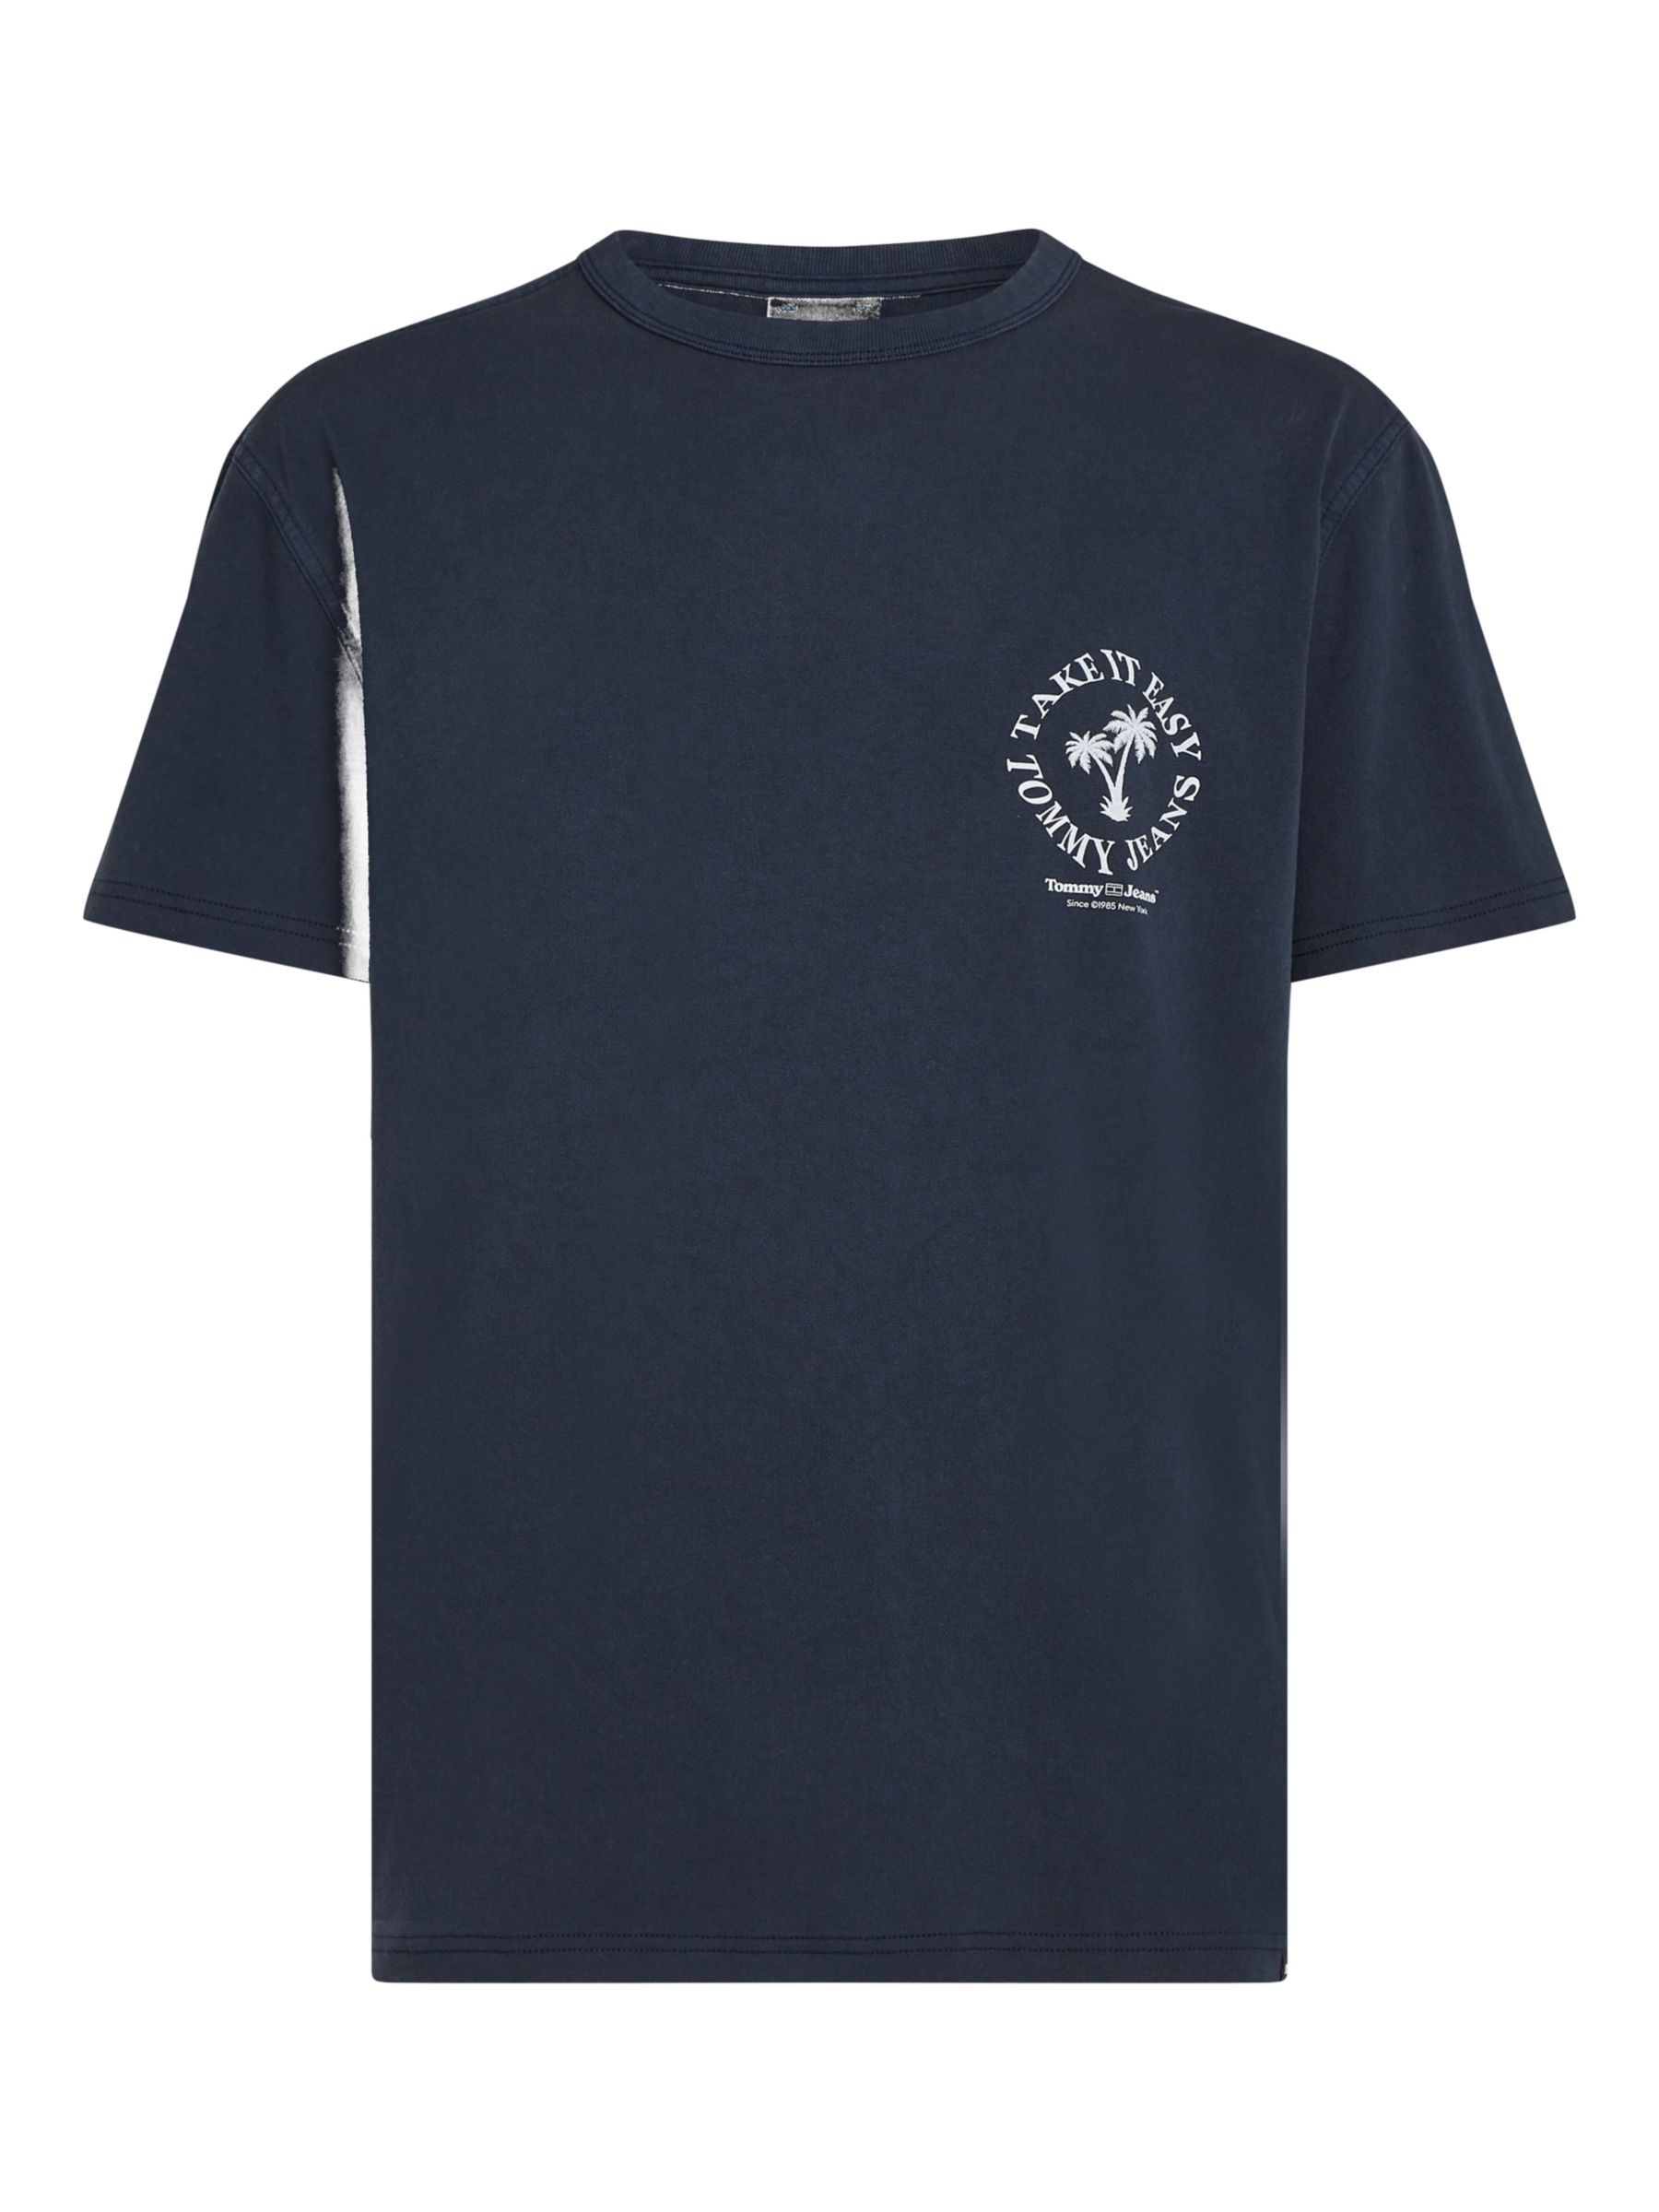 Buy Tommy Jeans Novelty Graphic T-Shirt, Dark Night Navy Online at johnlewis.com